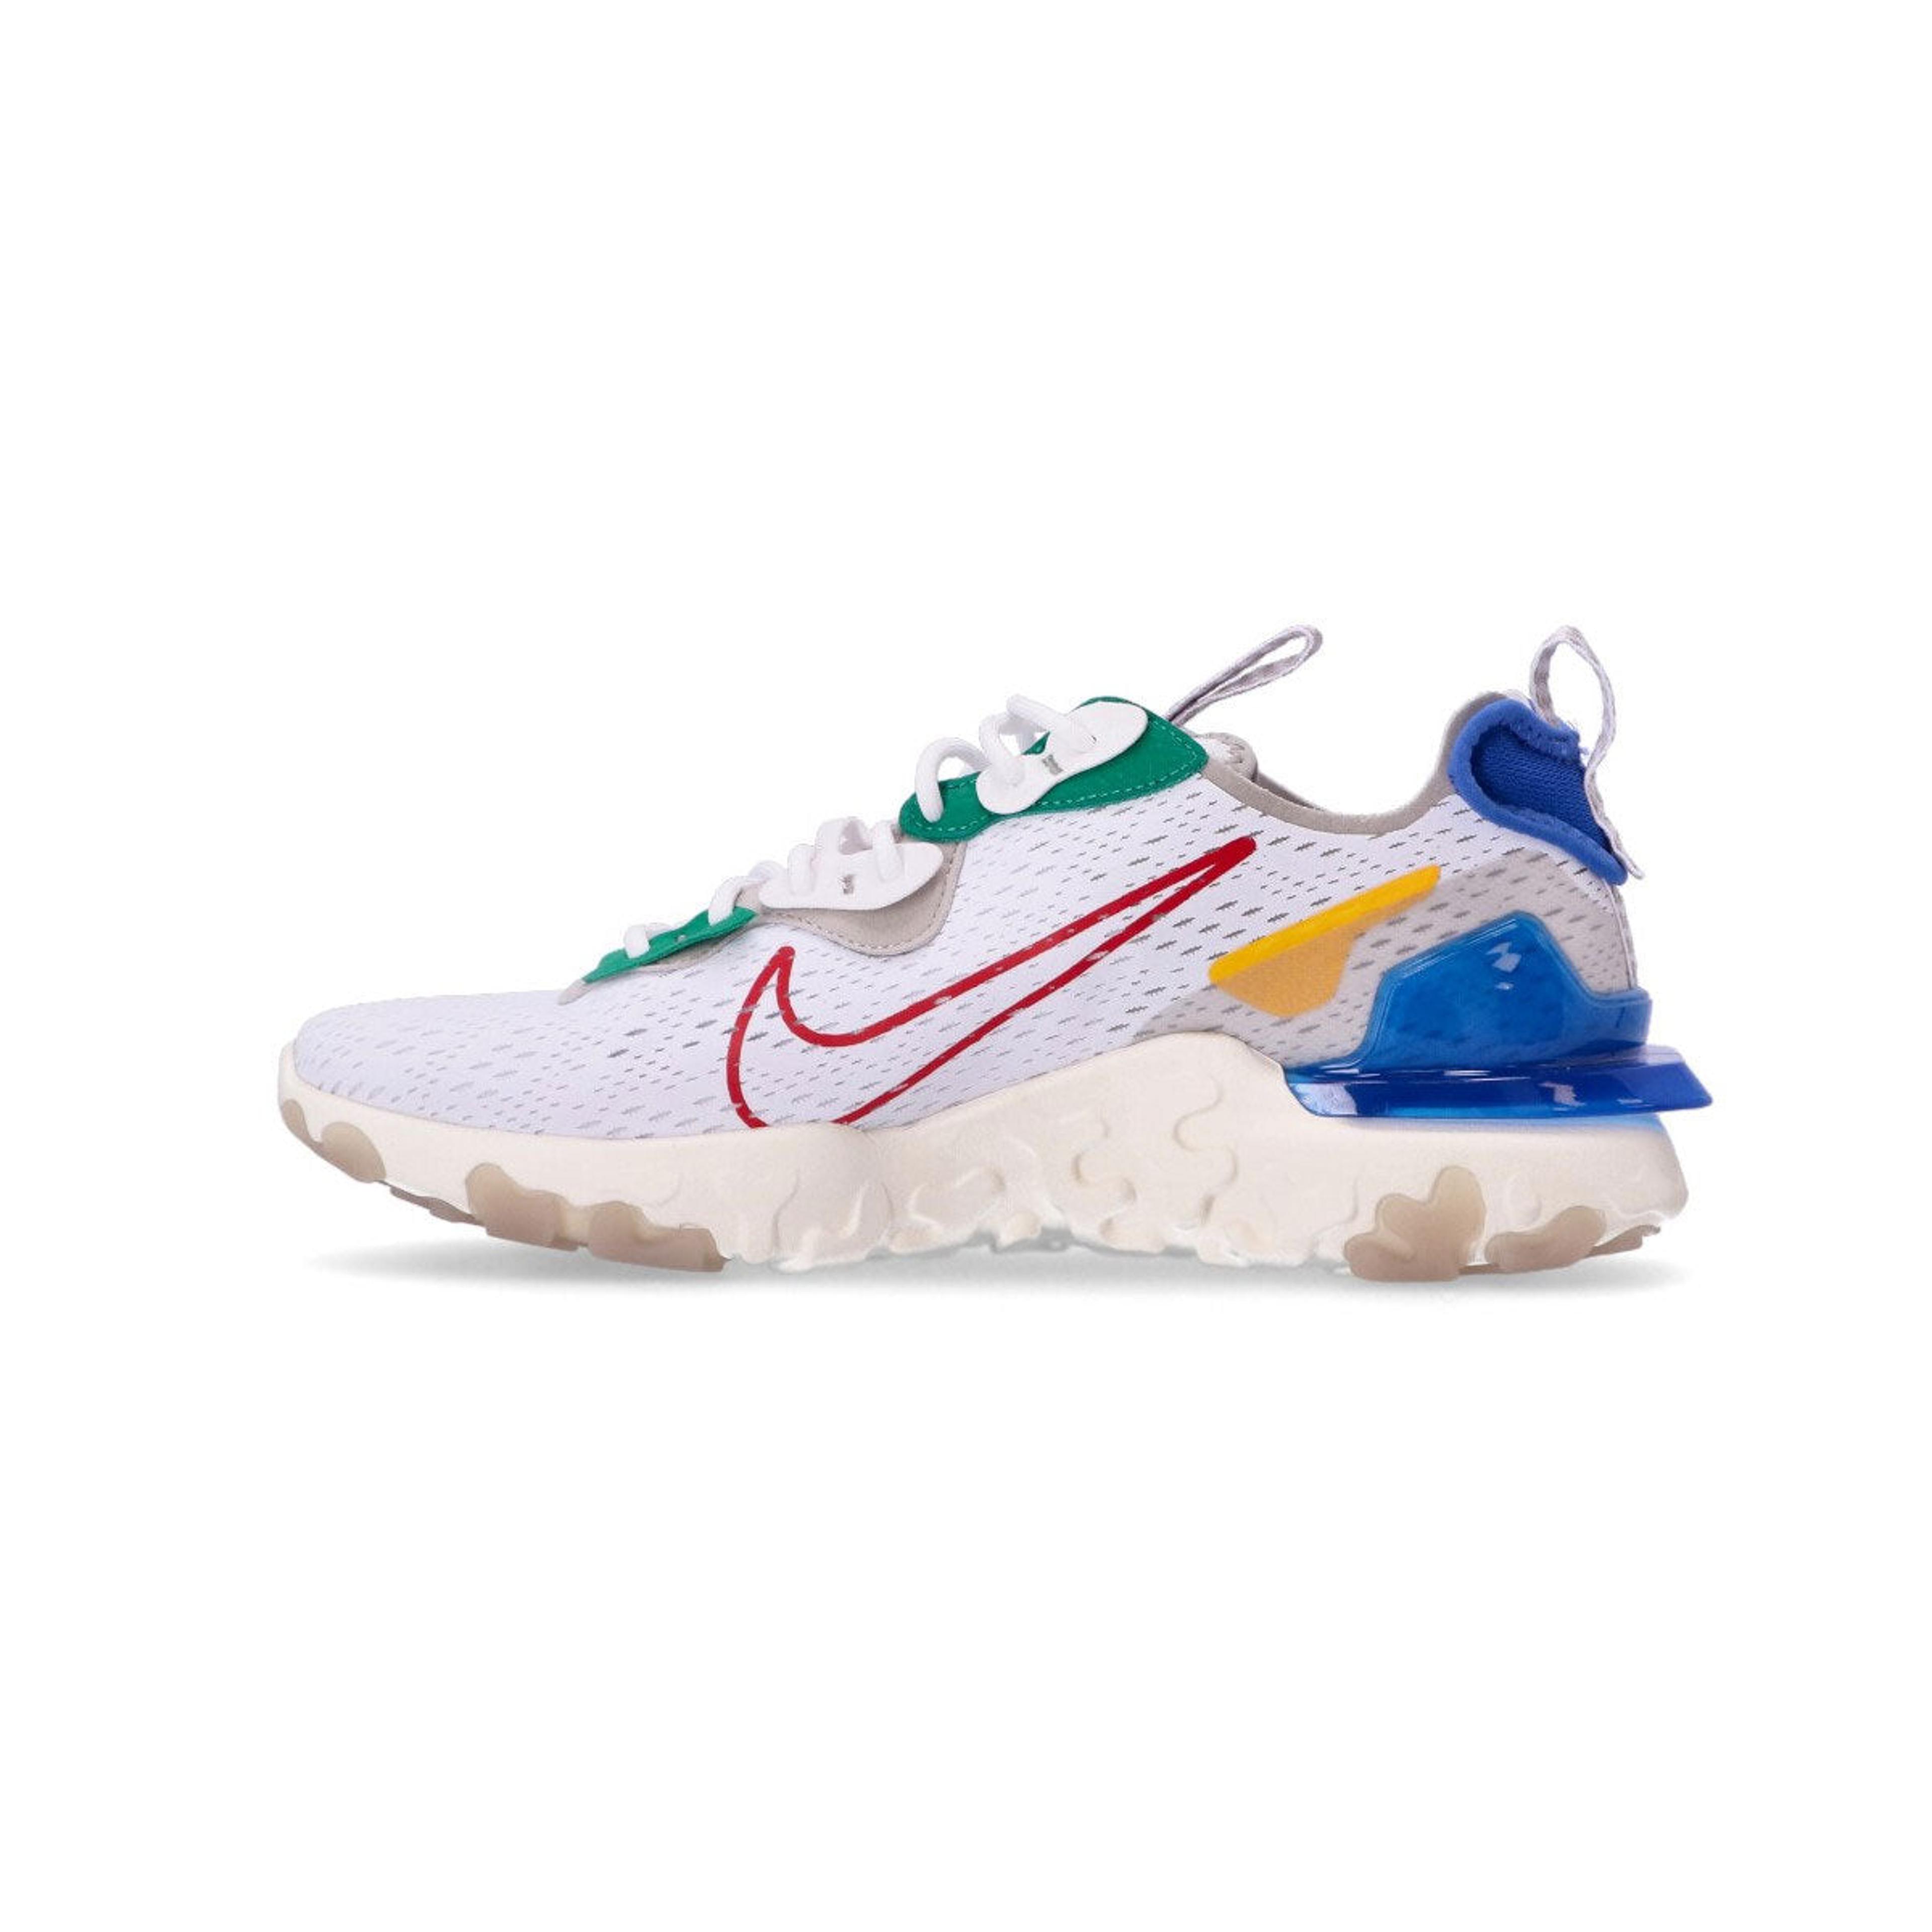 Alternate View 3 of Nike Men's React Vision Summer Brights